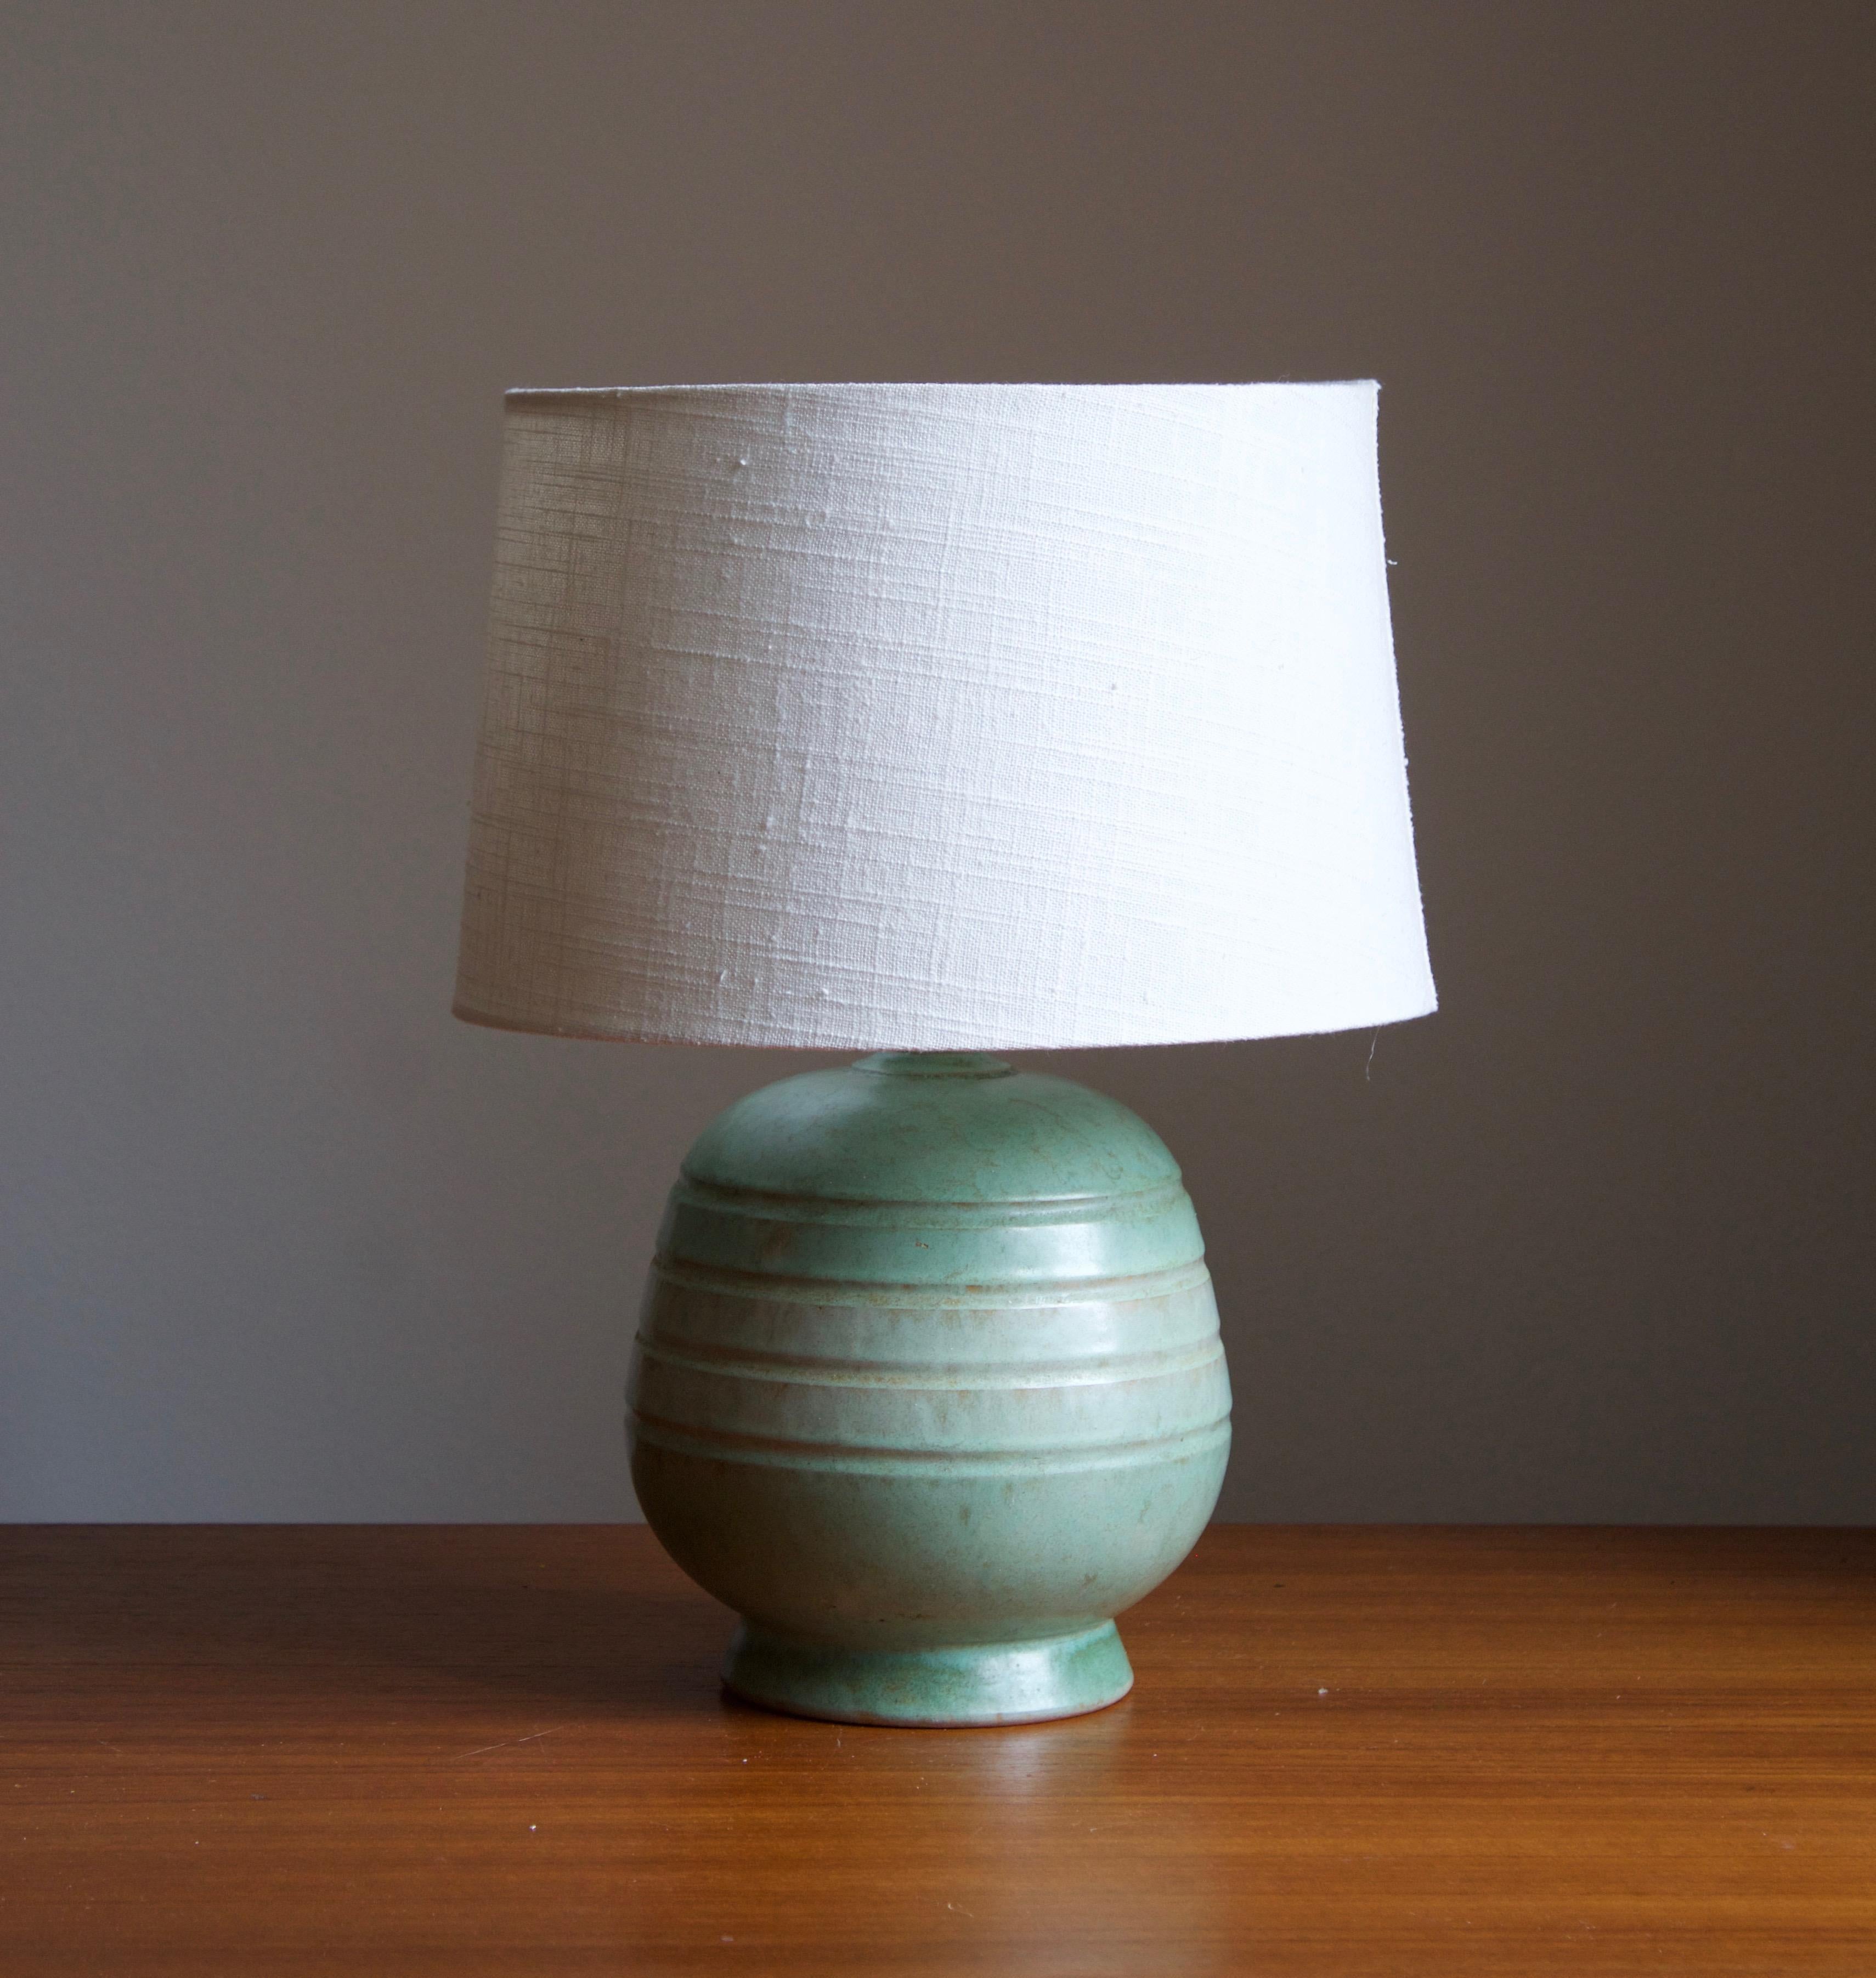 An early modernist table lamp. Production attributed to Upsala-Ekeby, Sweden, 1930s.

Stated dimensions exclude lampshade. Height includes the socket. Sold without lampshade.

Glaze features a green color with hints of brown.

Other designers of the